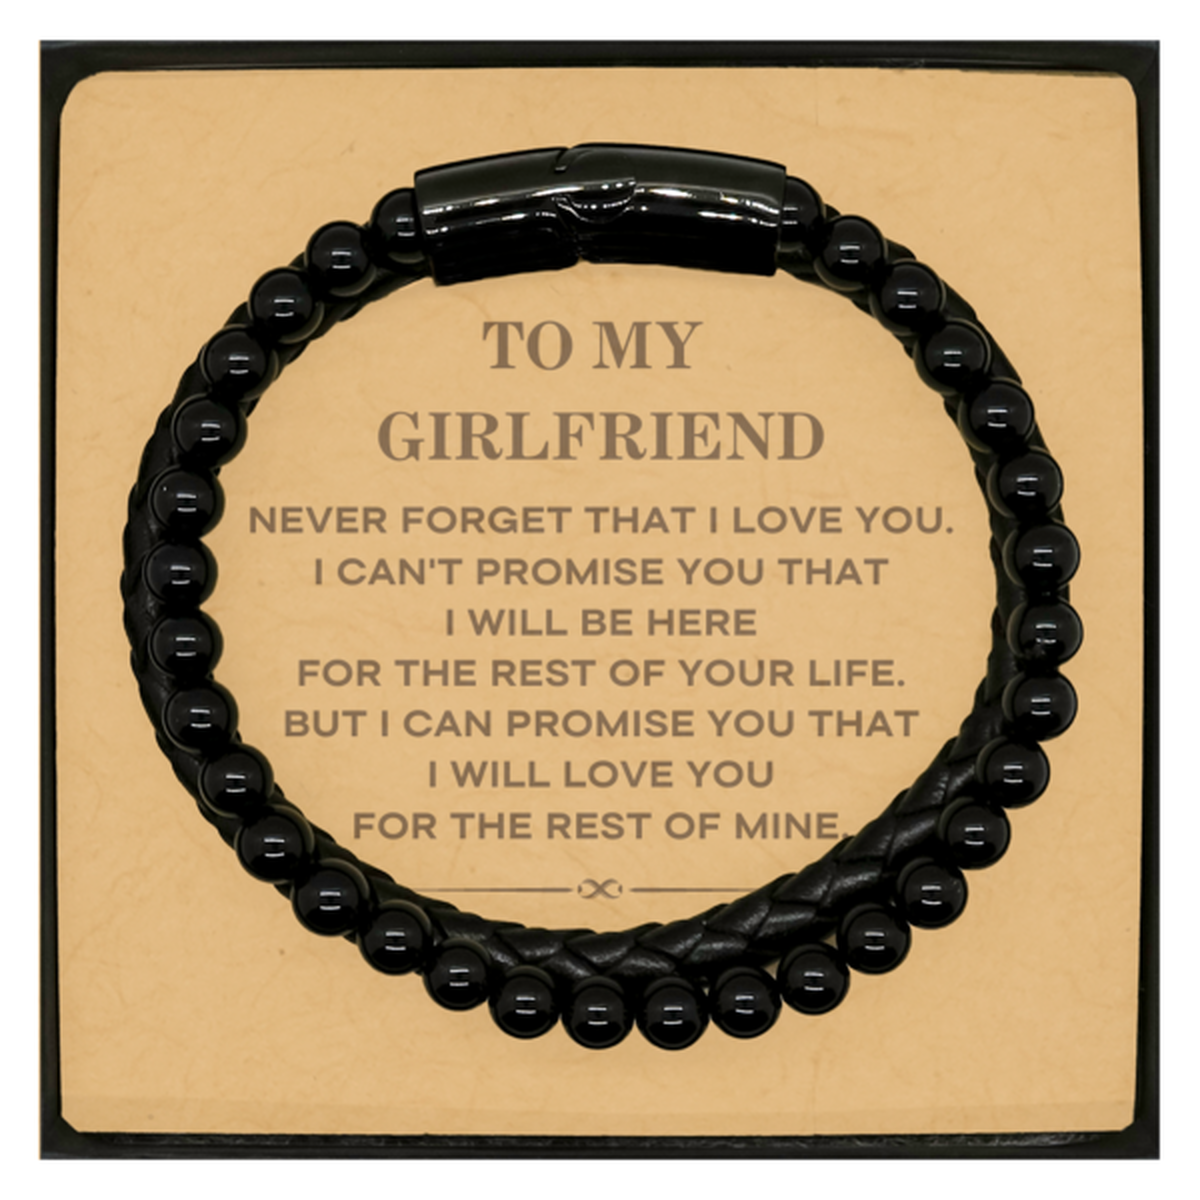 To My Girlfriend Gifts, I will love you for the rest of mine, Love Girlfriend Bracelet, Birthday Christmas Unique Stone Leather Bracelets For Girlfriend